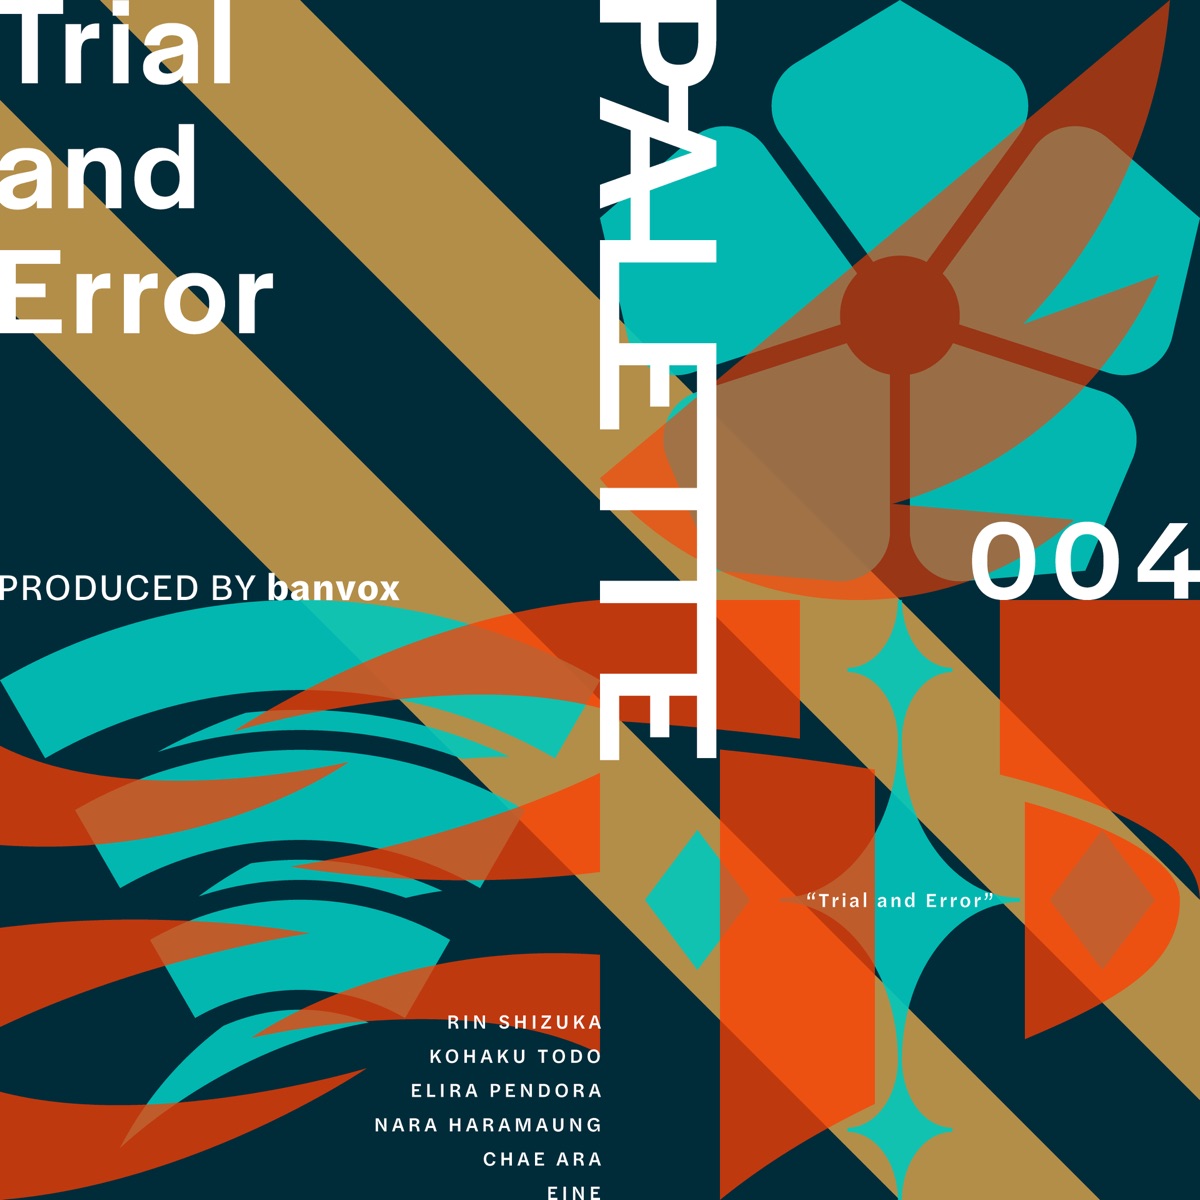 『VirtuaReal - Trial and Error (Chinese Ver.) feat. Eine 歌詞』収録の『Trial and Error』ジャケット